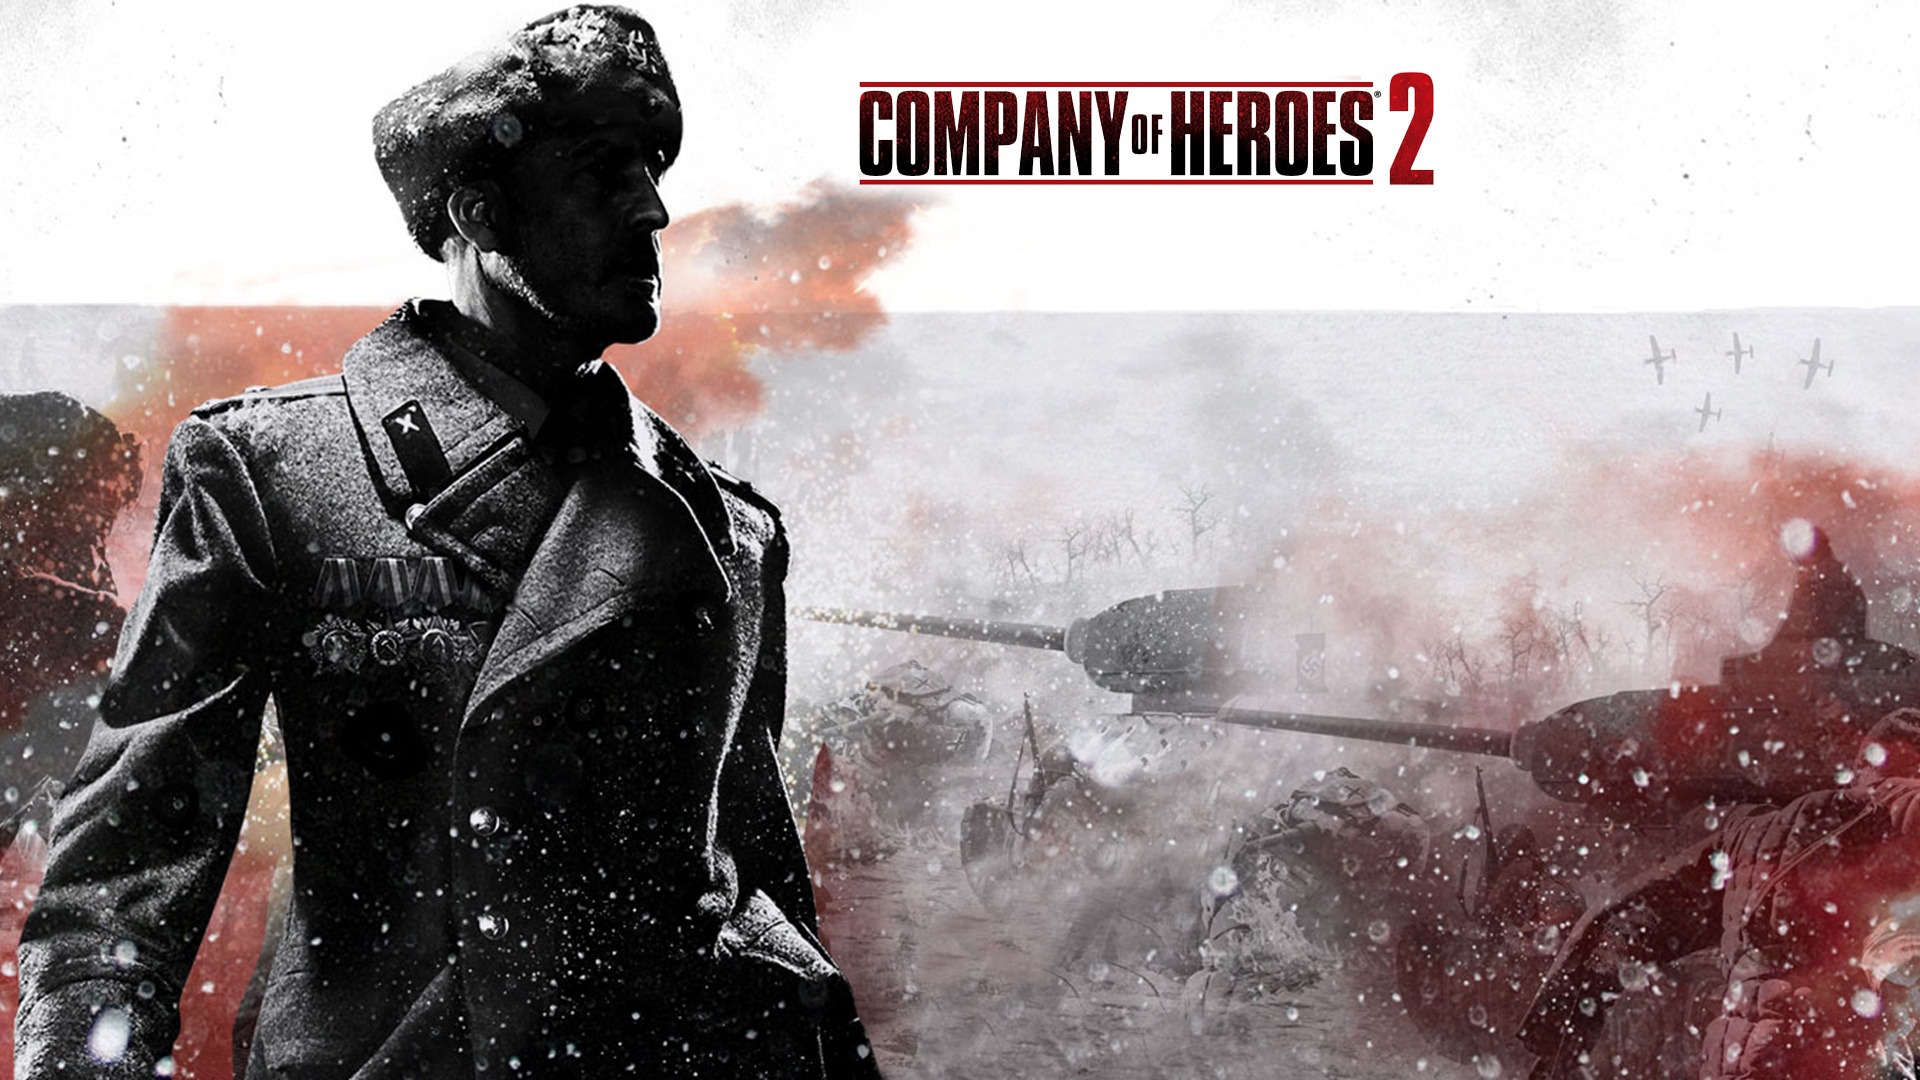 Company of Heroes 2 Character for 1920 x 1080 HDTV 1080p resolution